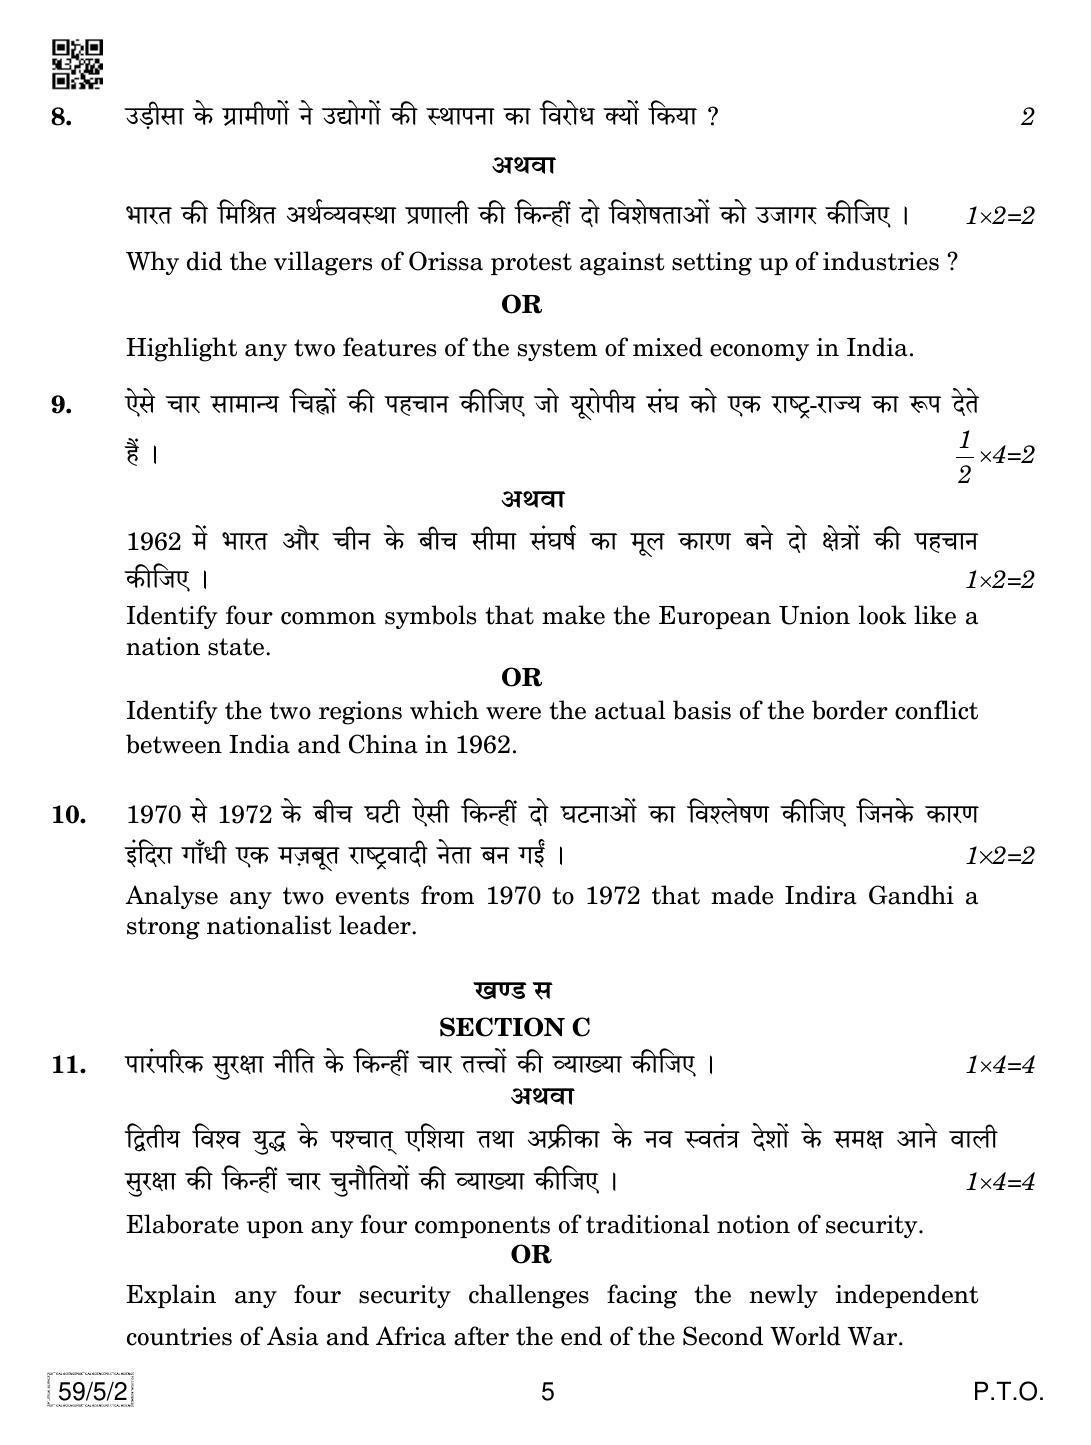 CBSE Class 12 59-5-2 Political Science 2019 Question Paper - Page 5